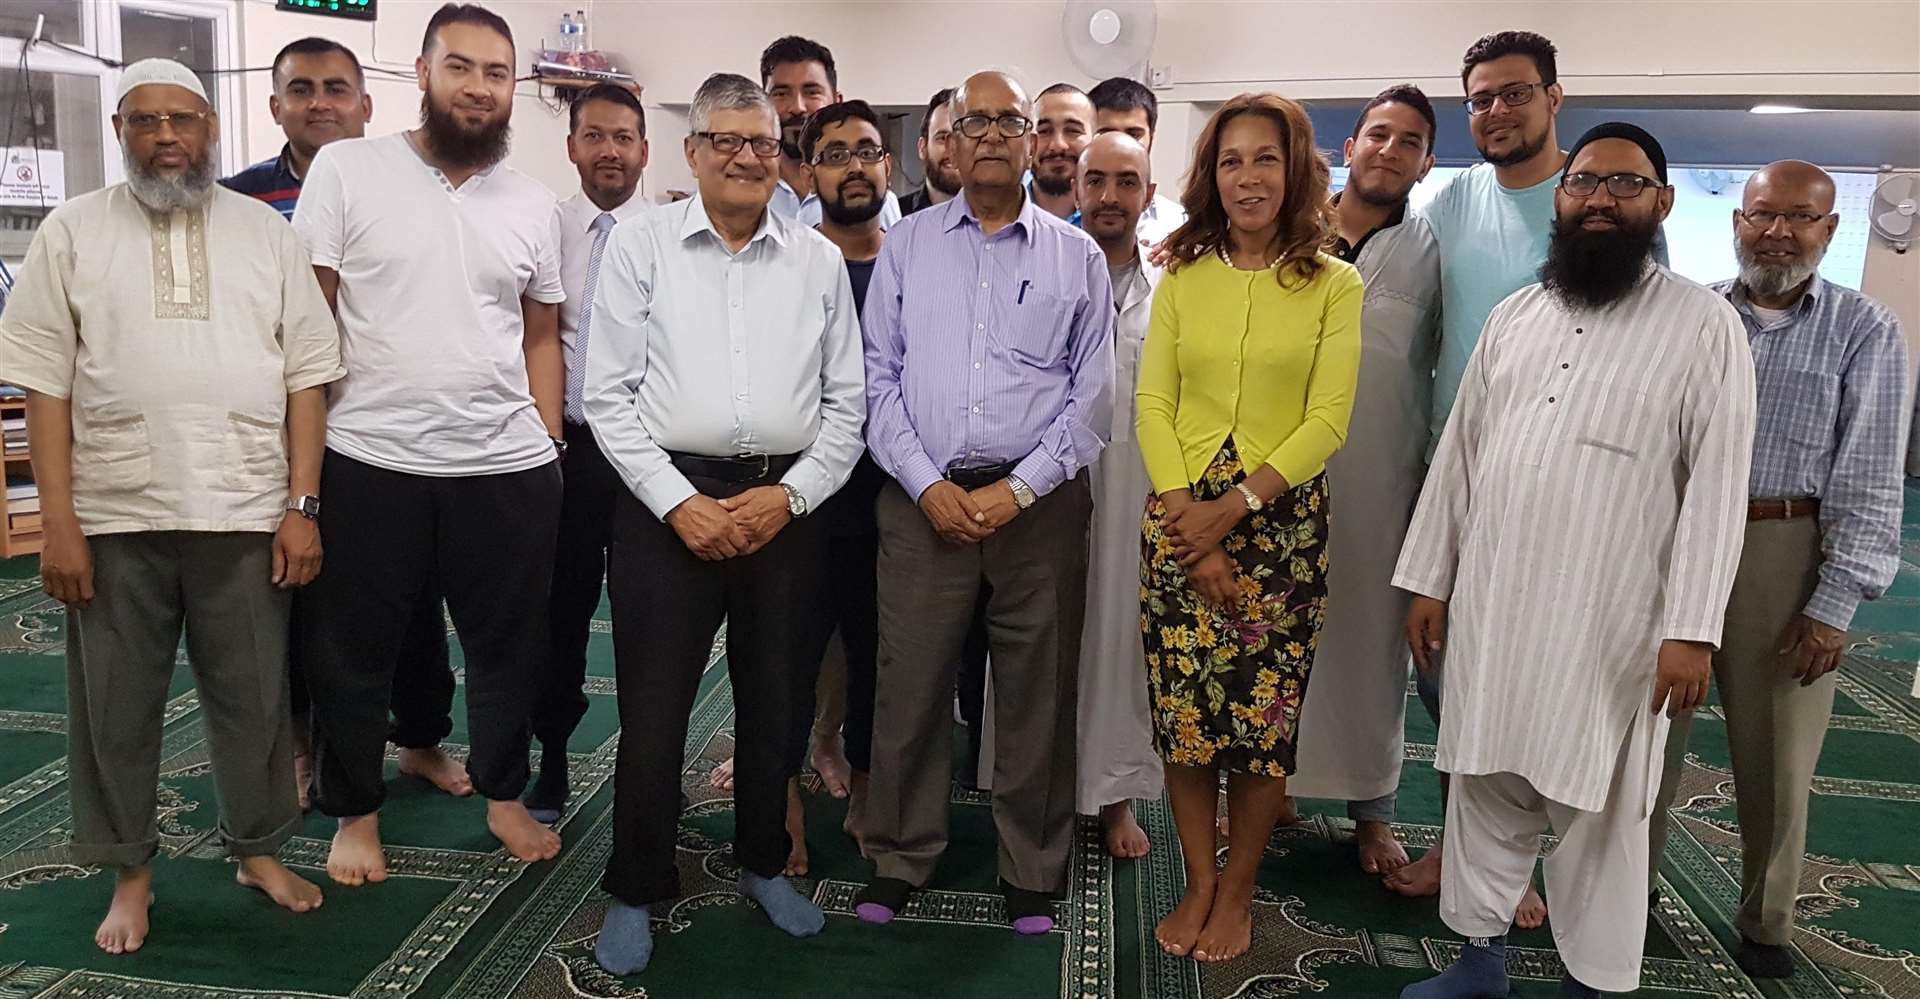 Helen Grant visited Maidstone Mosque in Mote Street after the suspicious package was sent on Wednesday